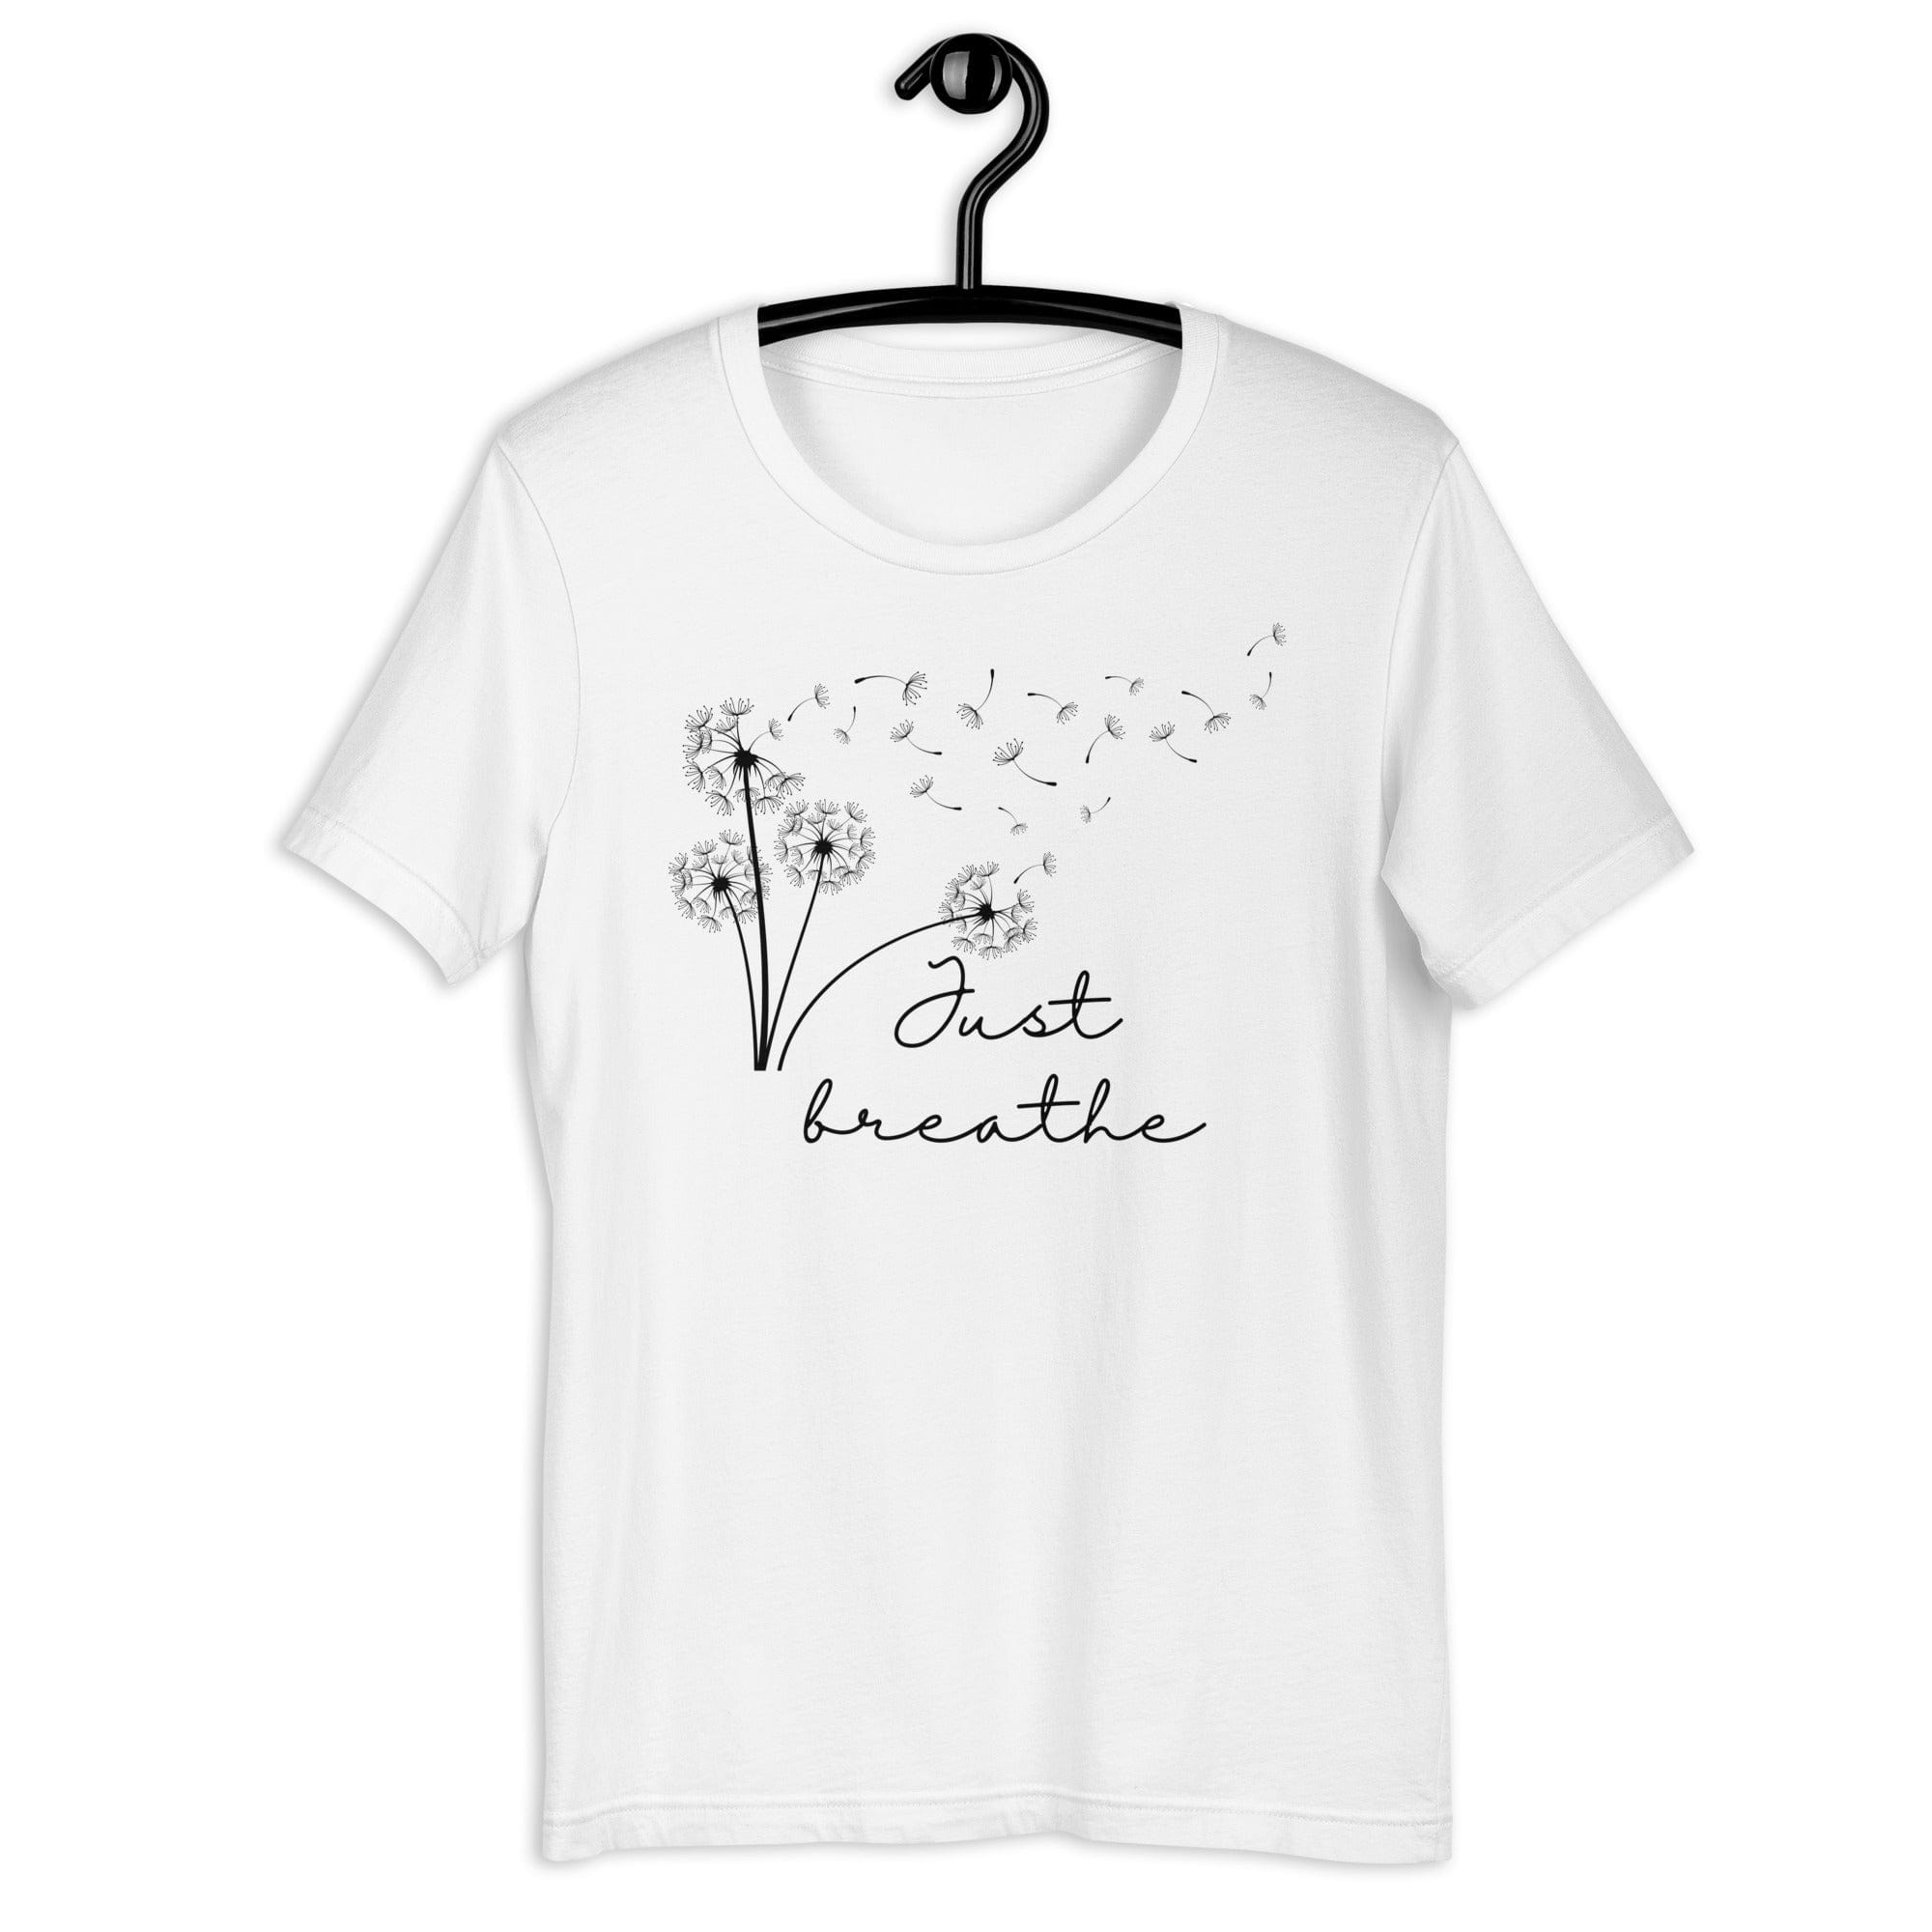 Spruced Roost Just Breathe Crew Neck Tshirt - S-3XL